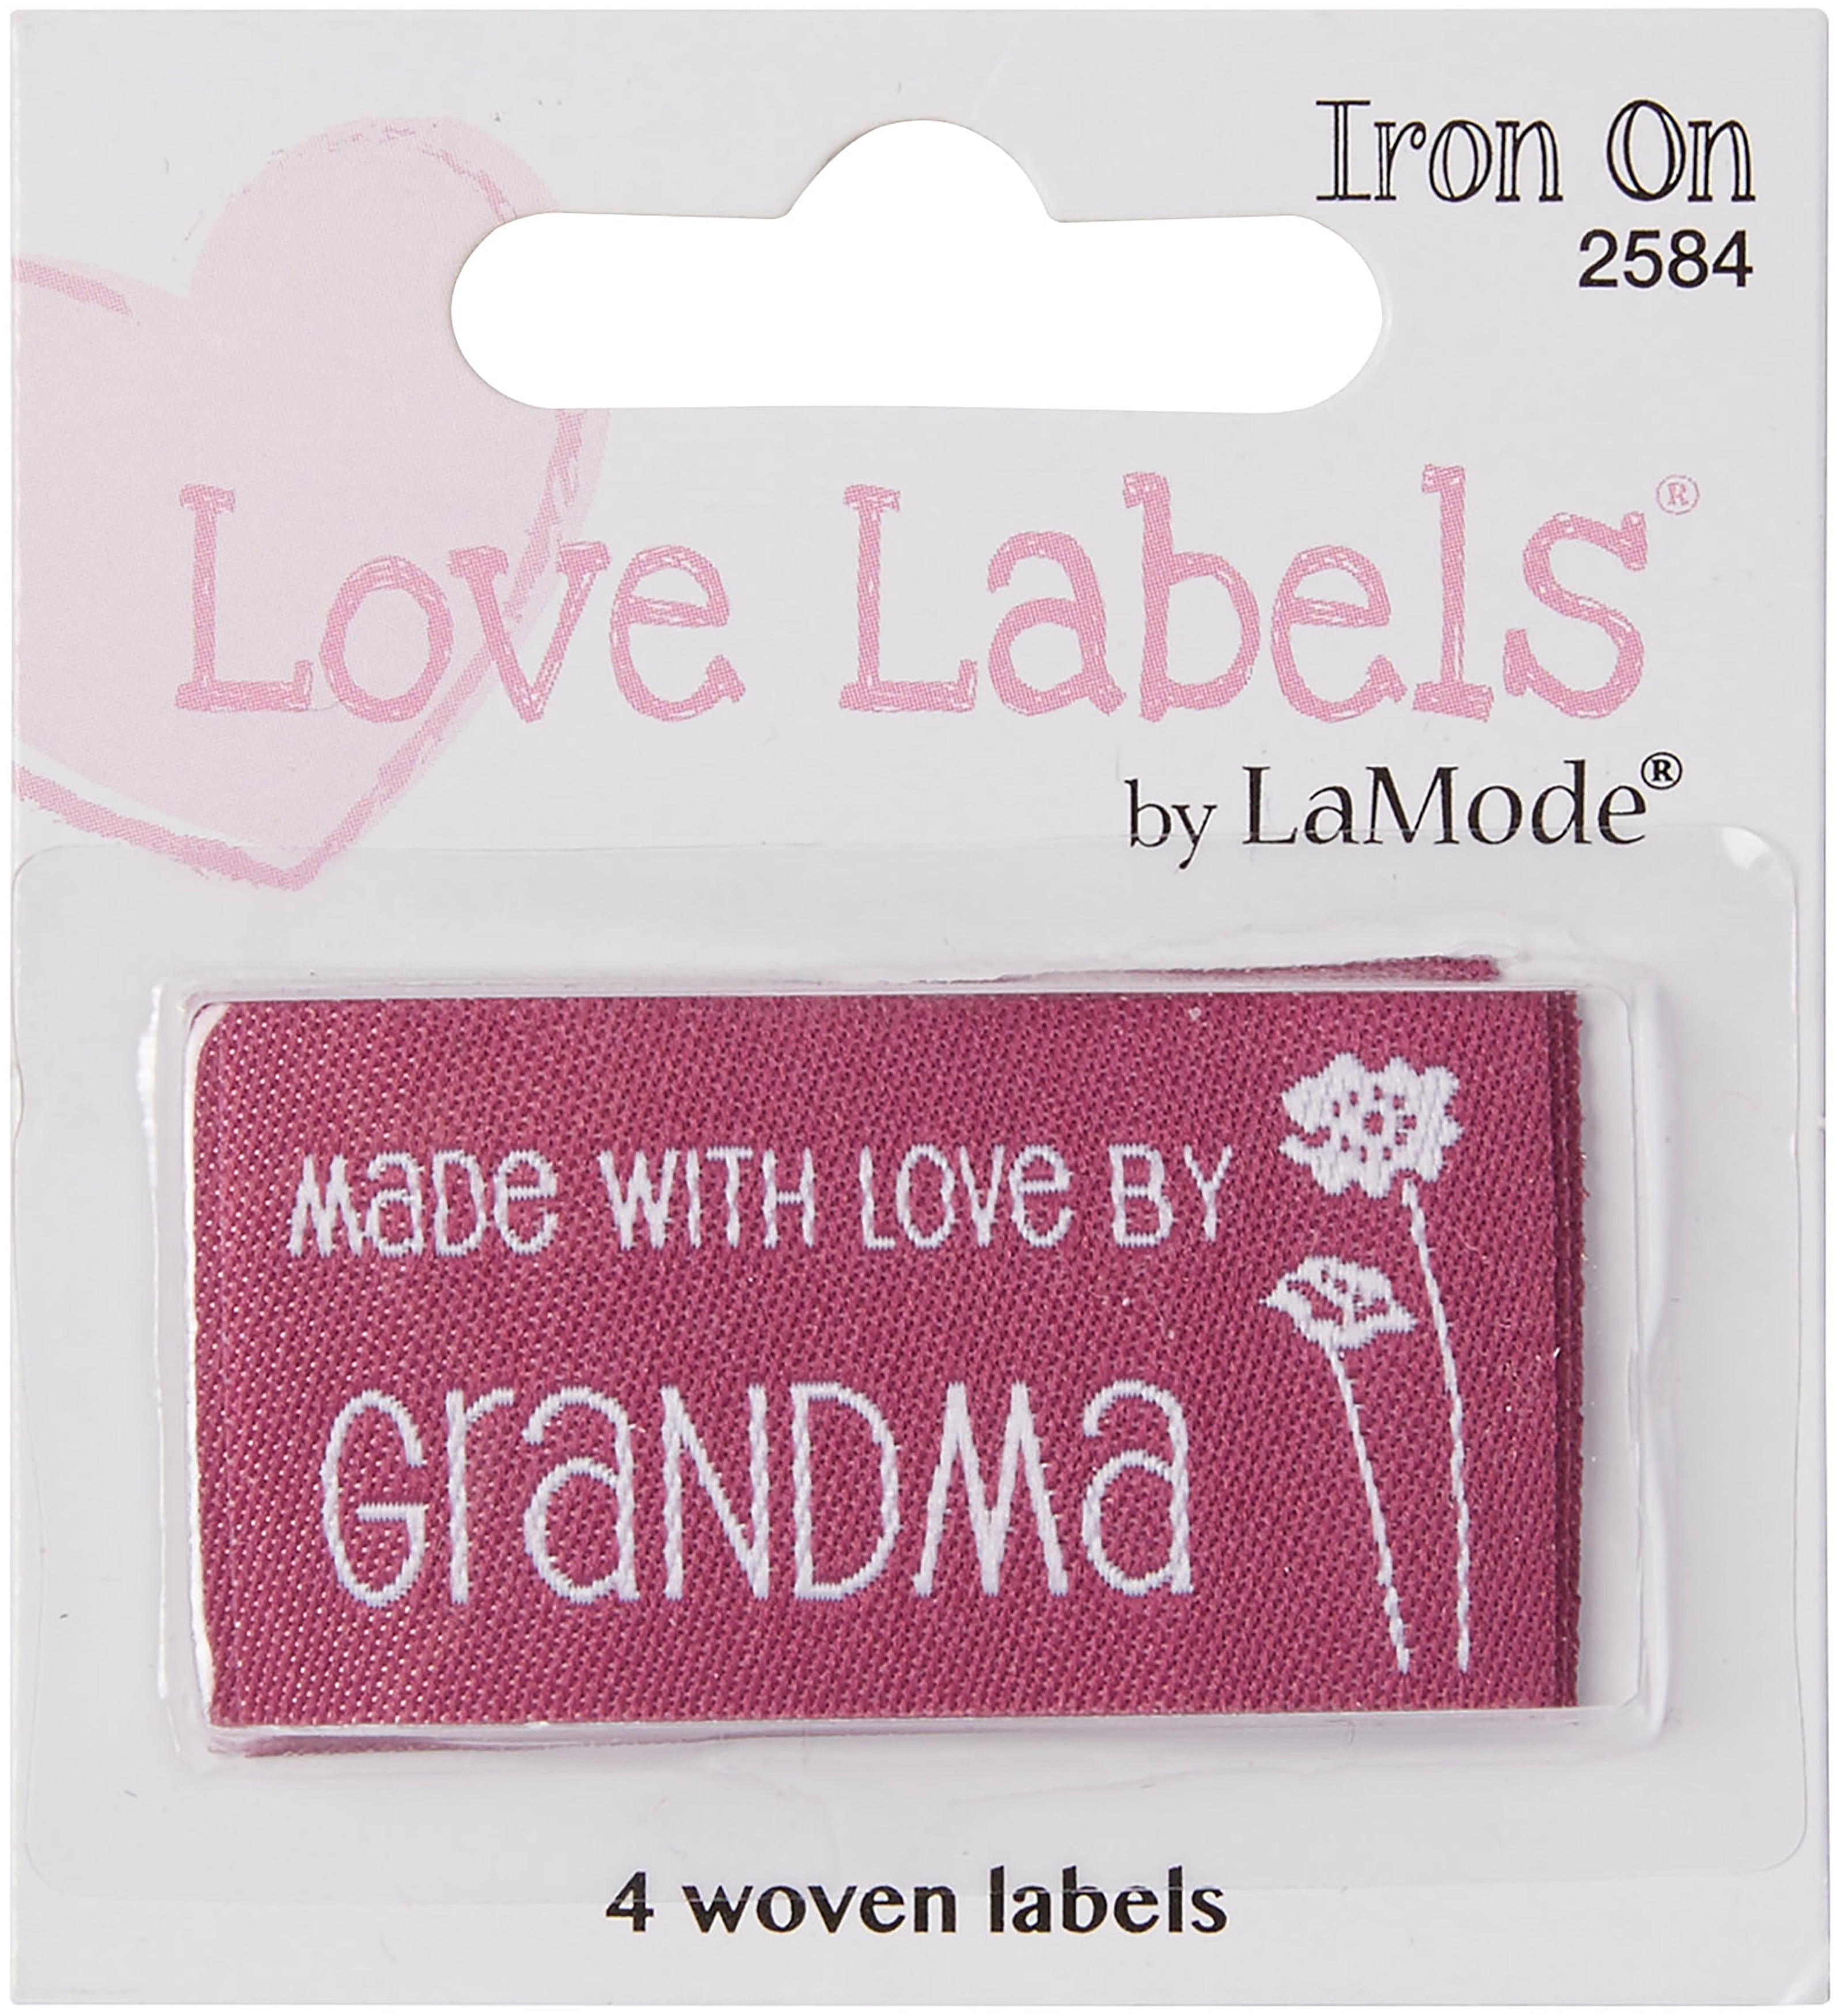 BLUMENTHAL LANSING 4 LOVE LABELS "MADE WITH LOVE BY GRANDMA" IRON ON LABELS 